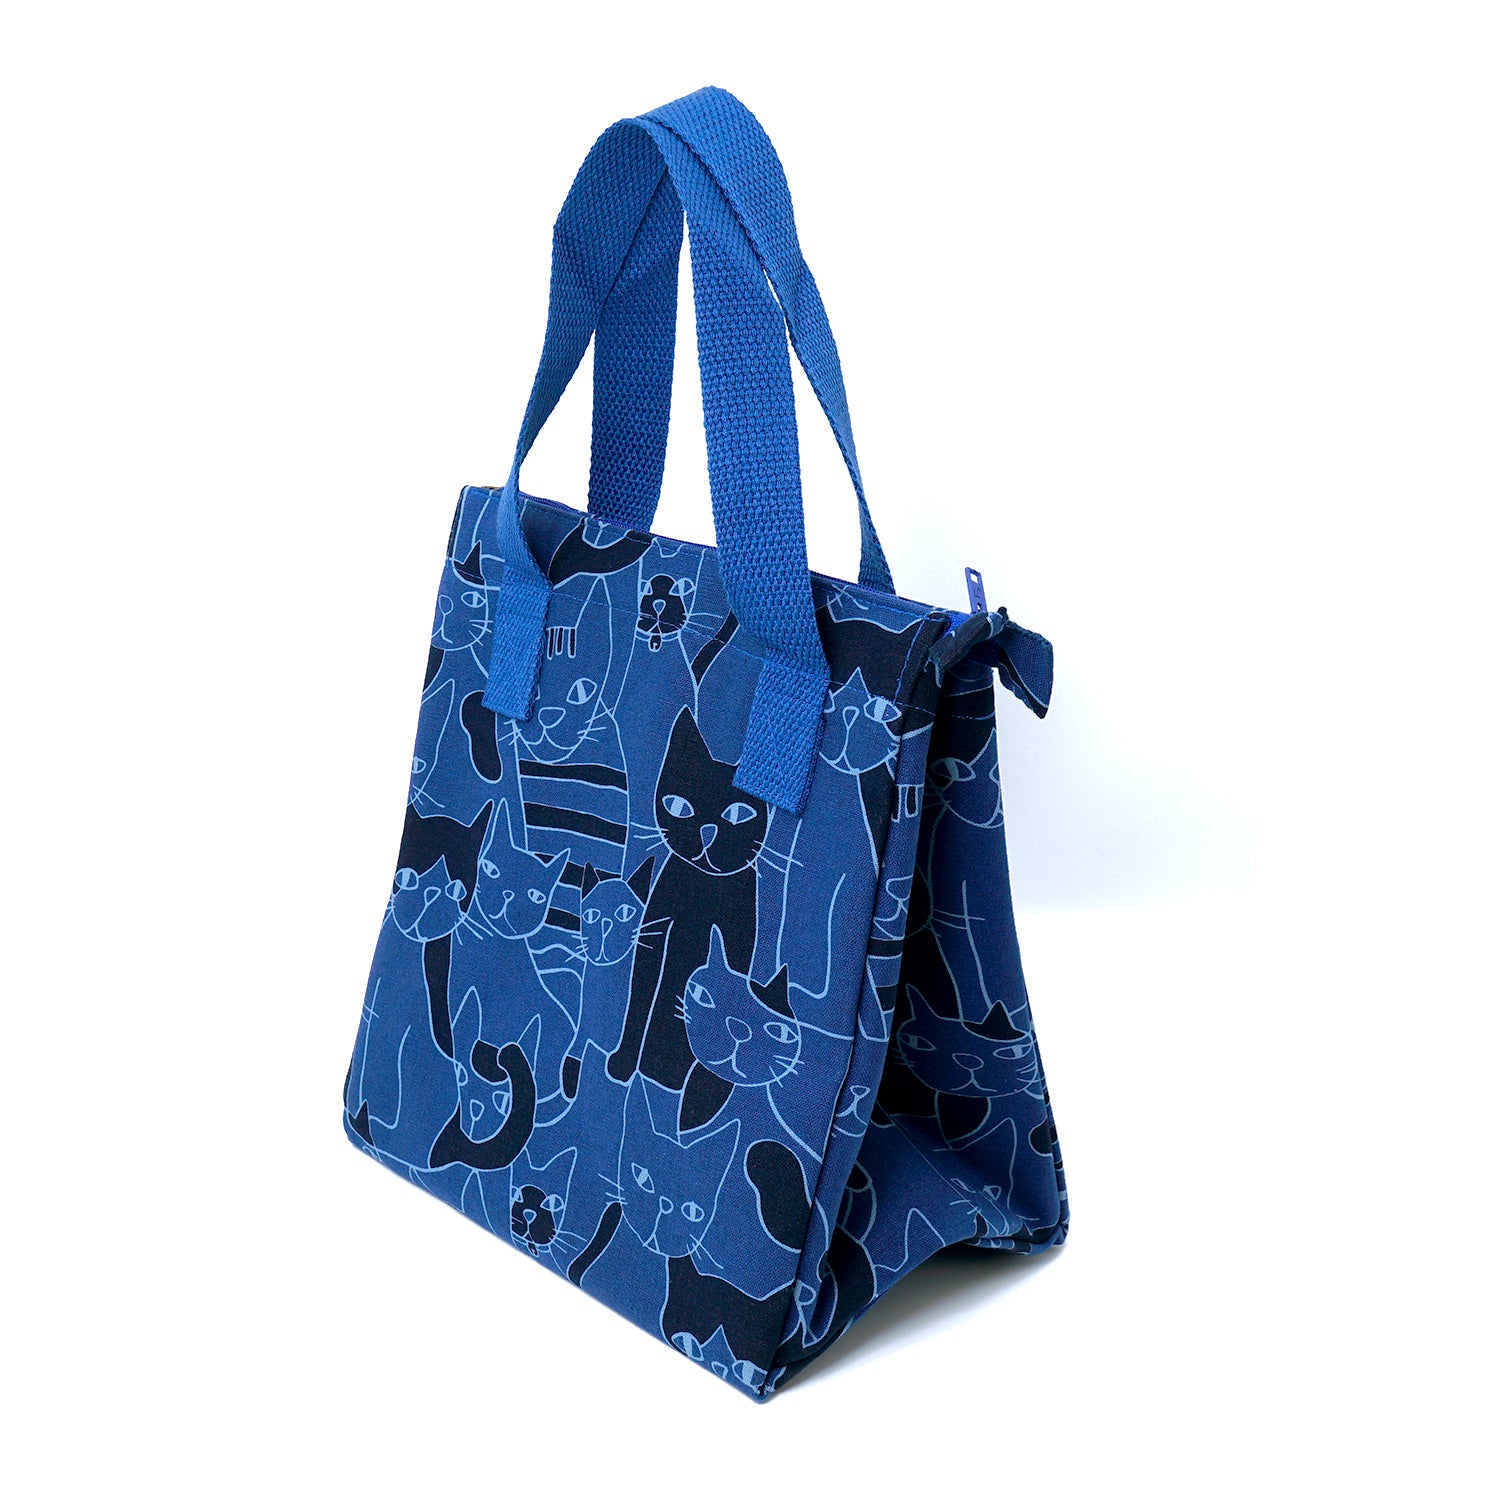 60% OFF - Insulated Lunch Bag - Blue Cat